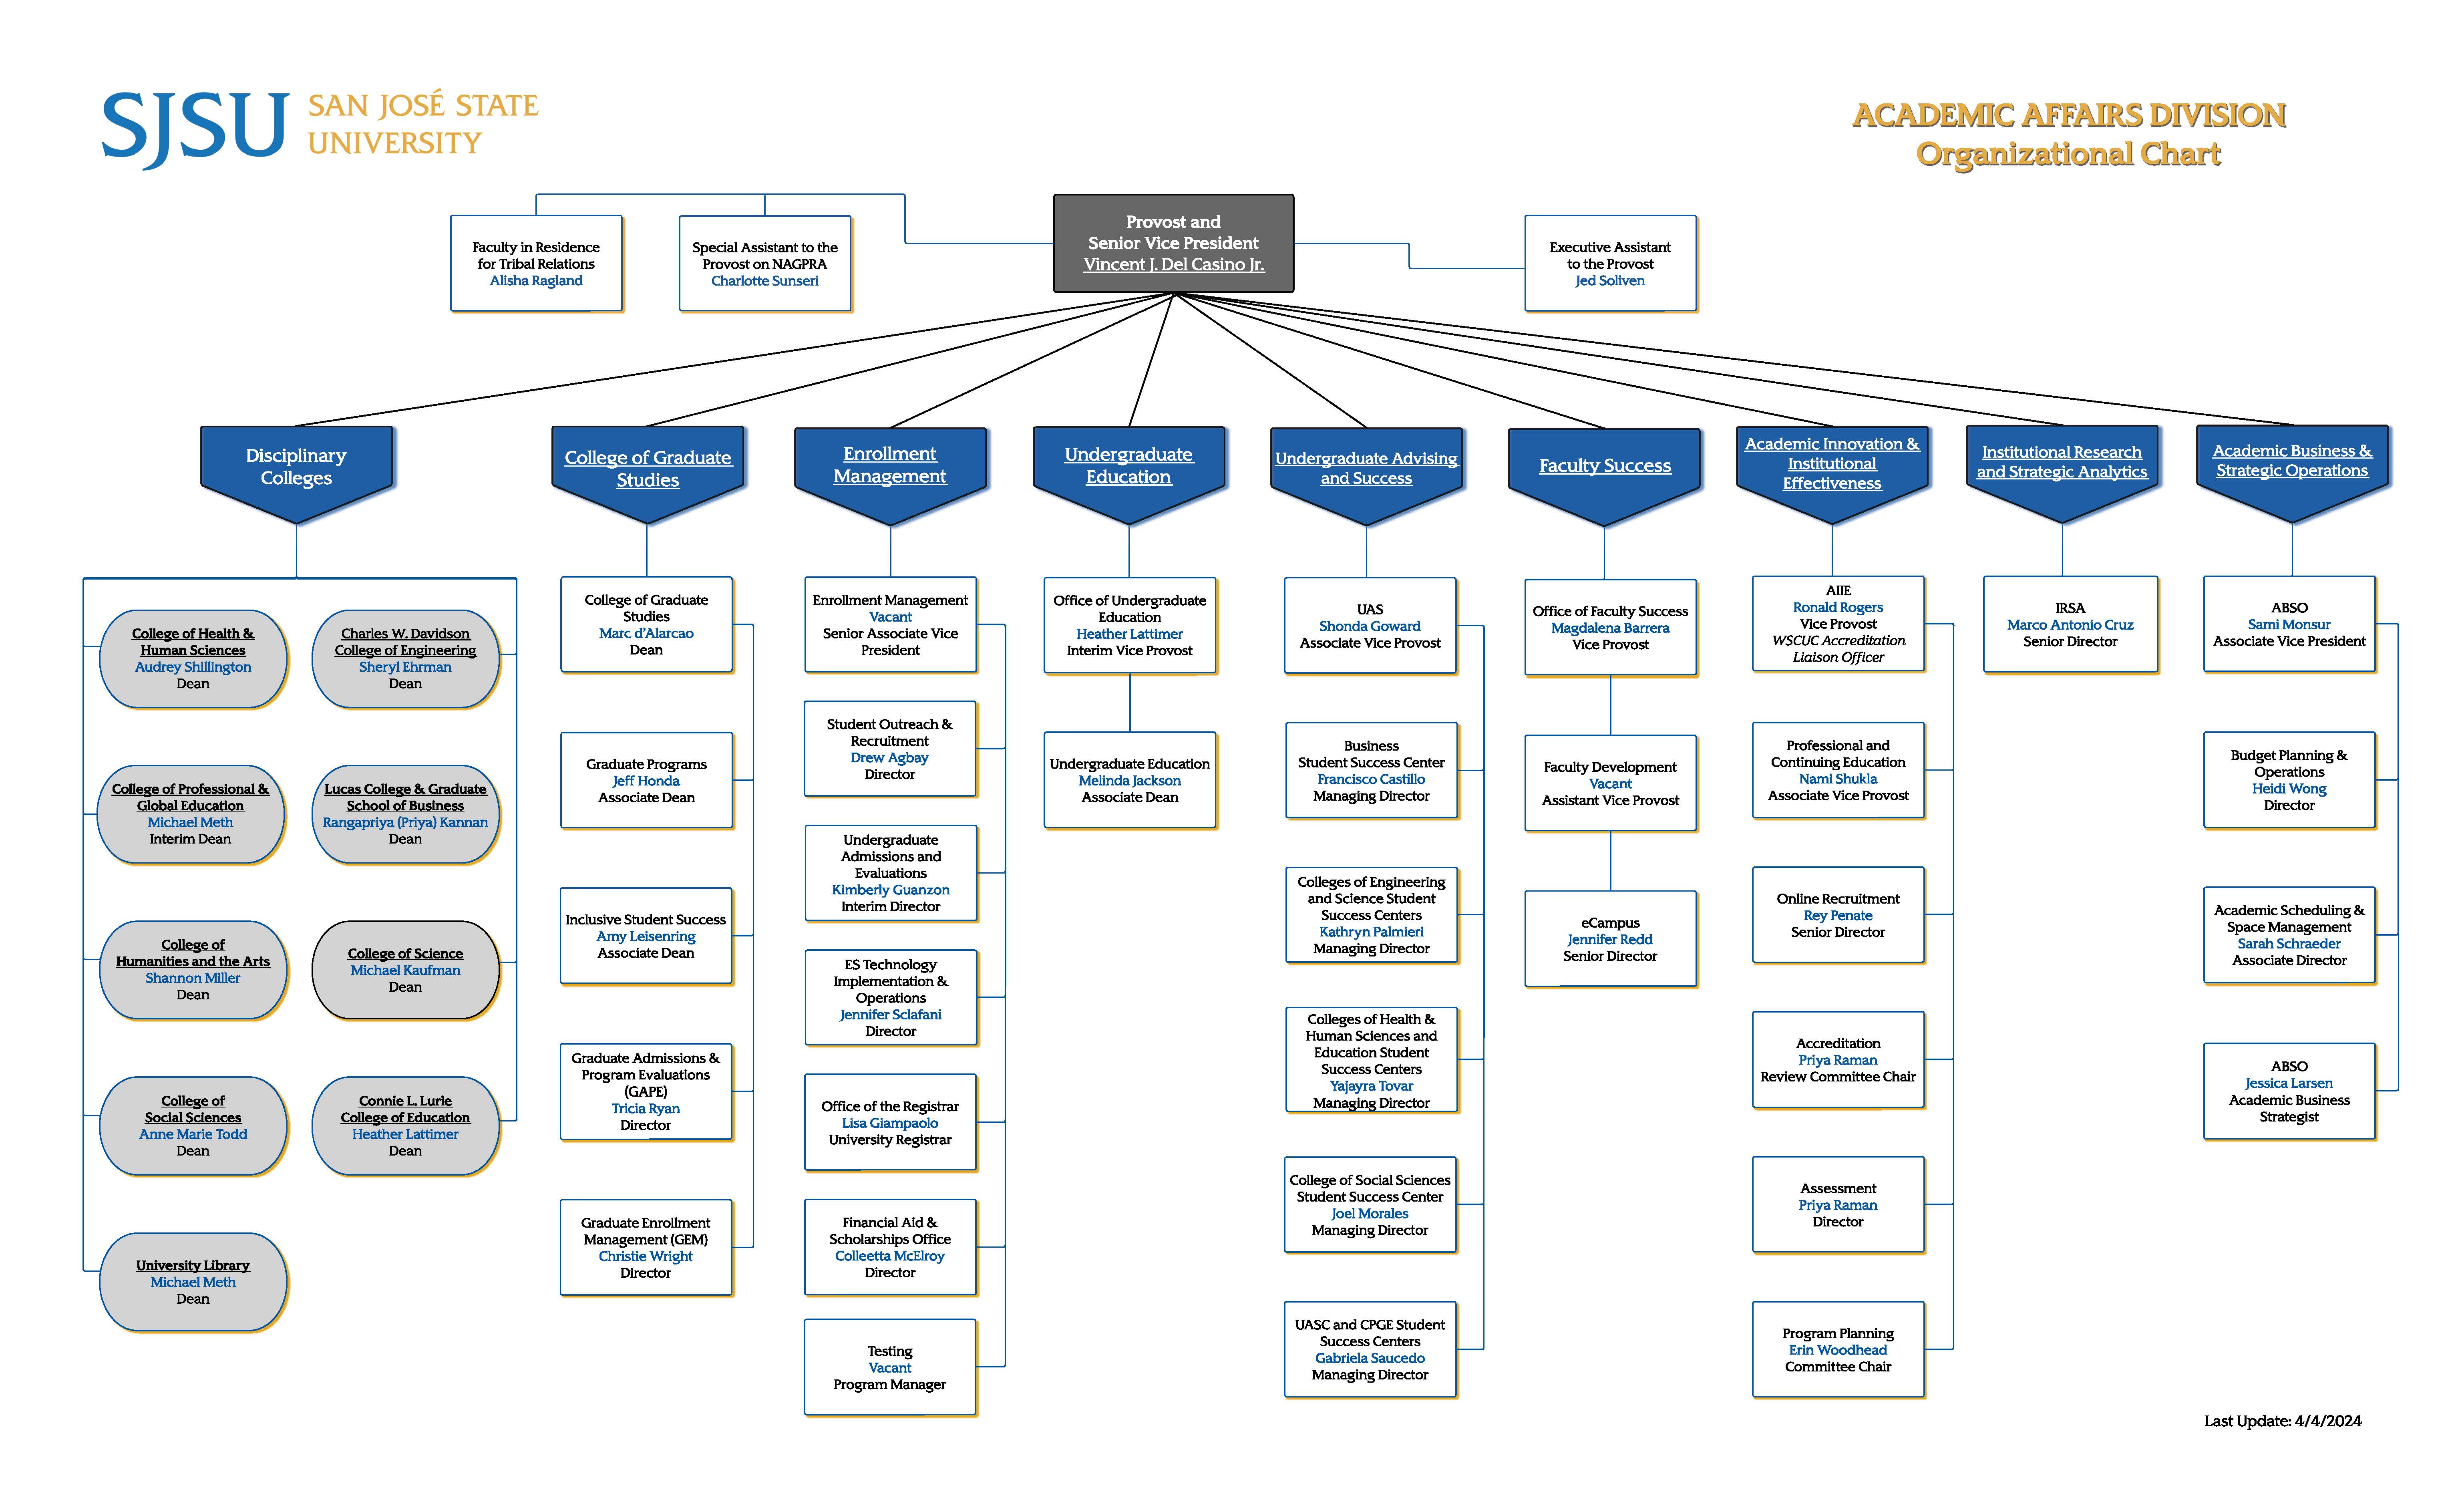 Organizational chart for academic affairs division